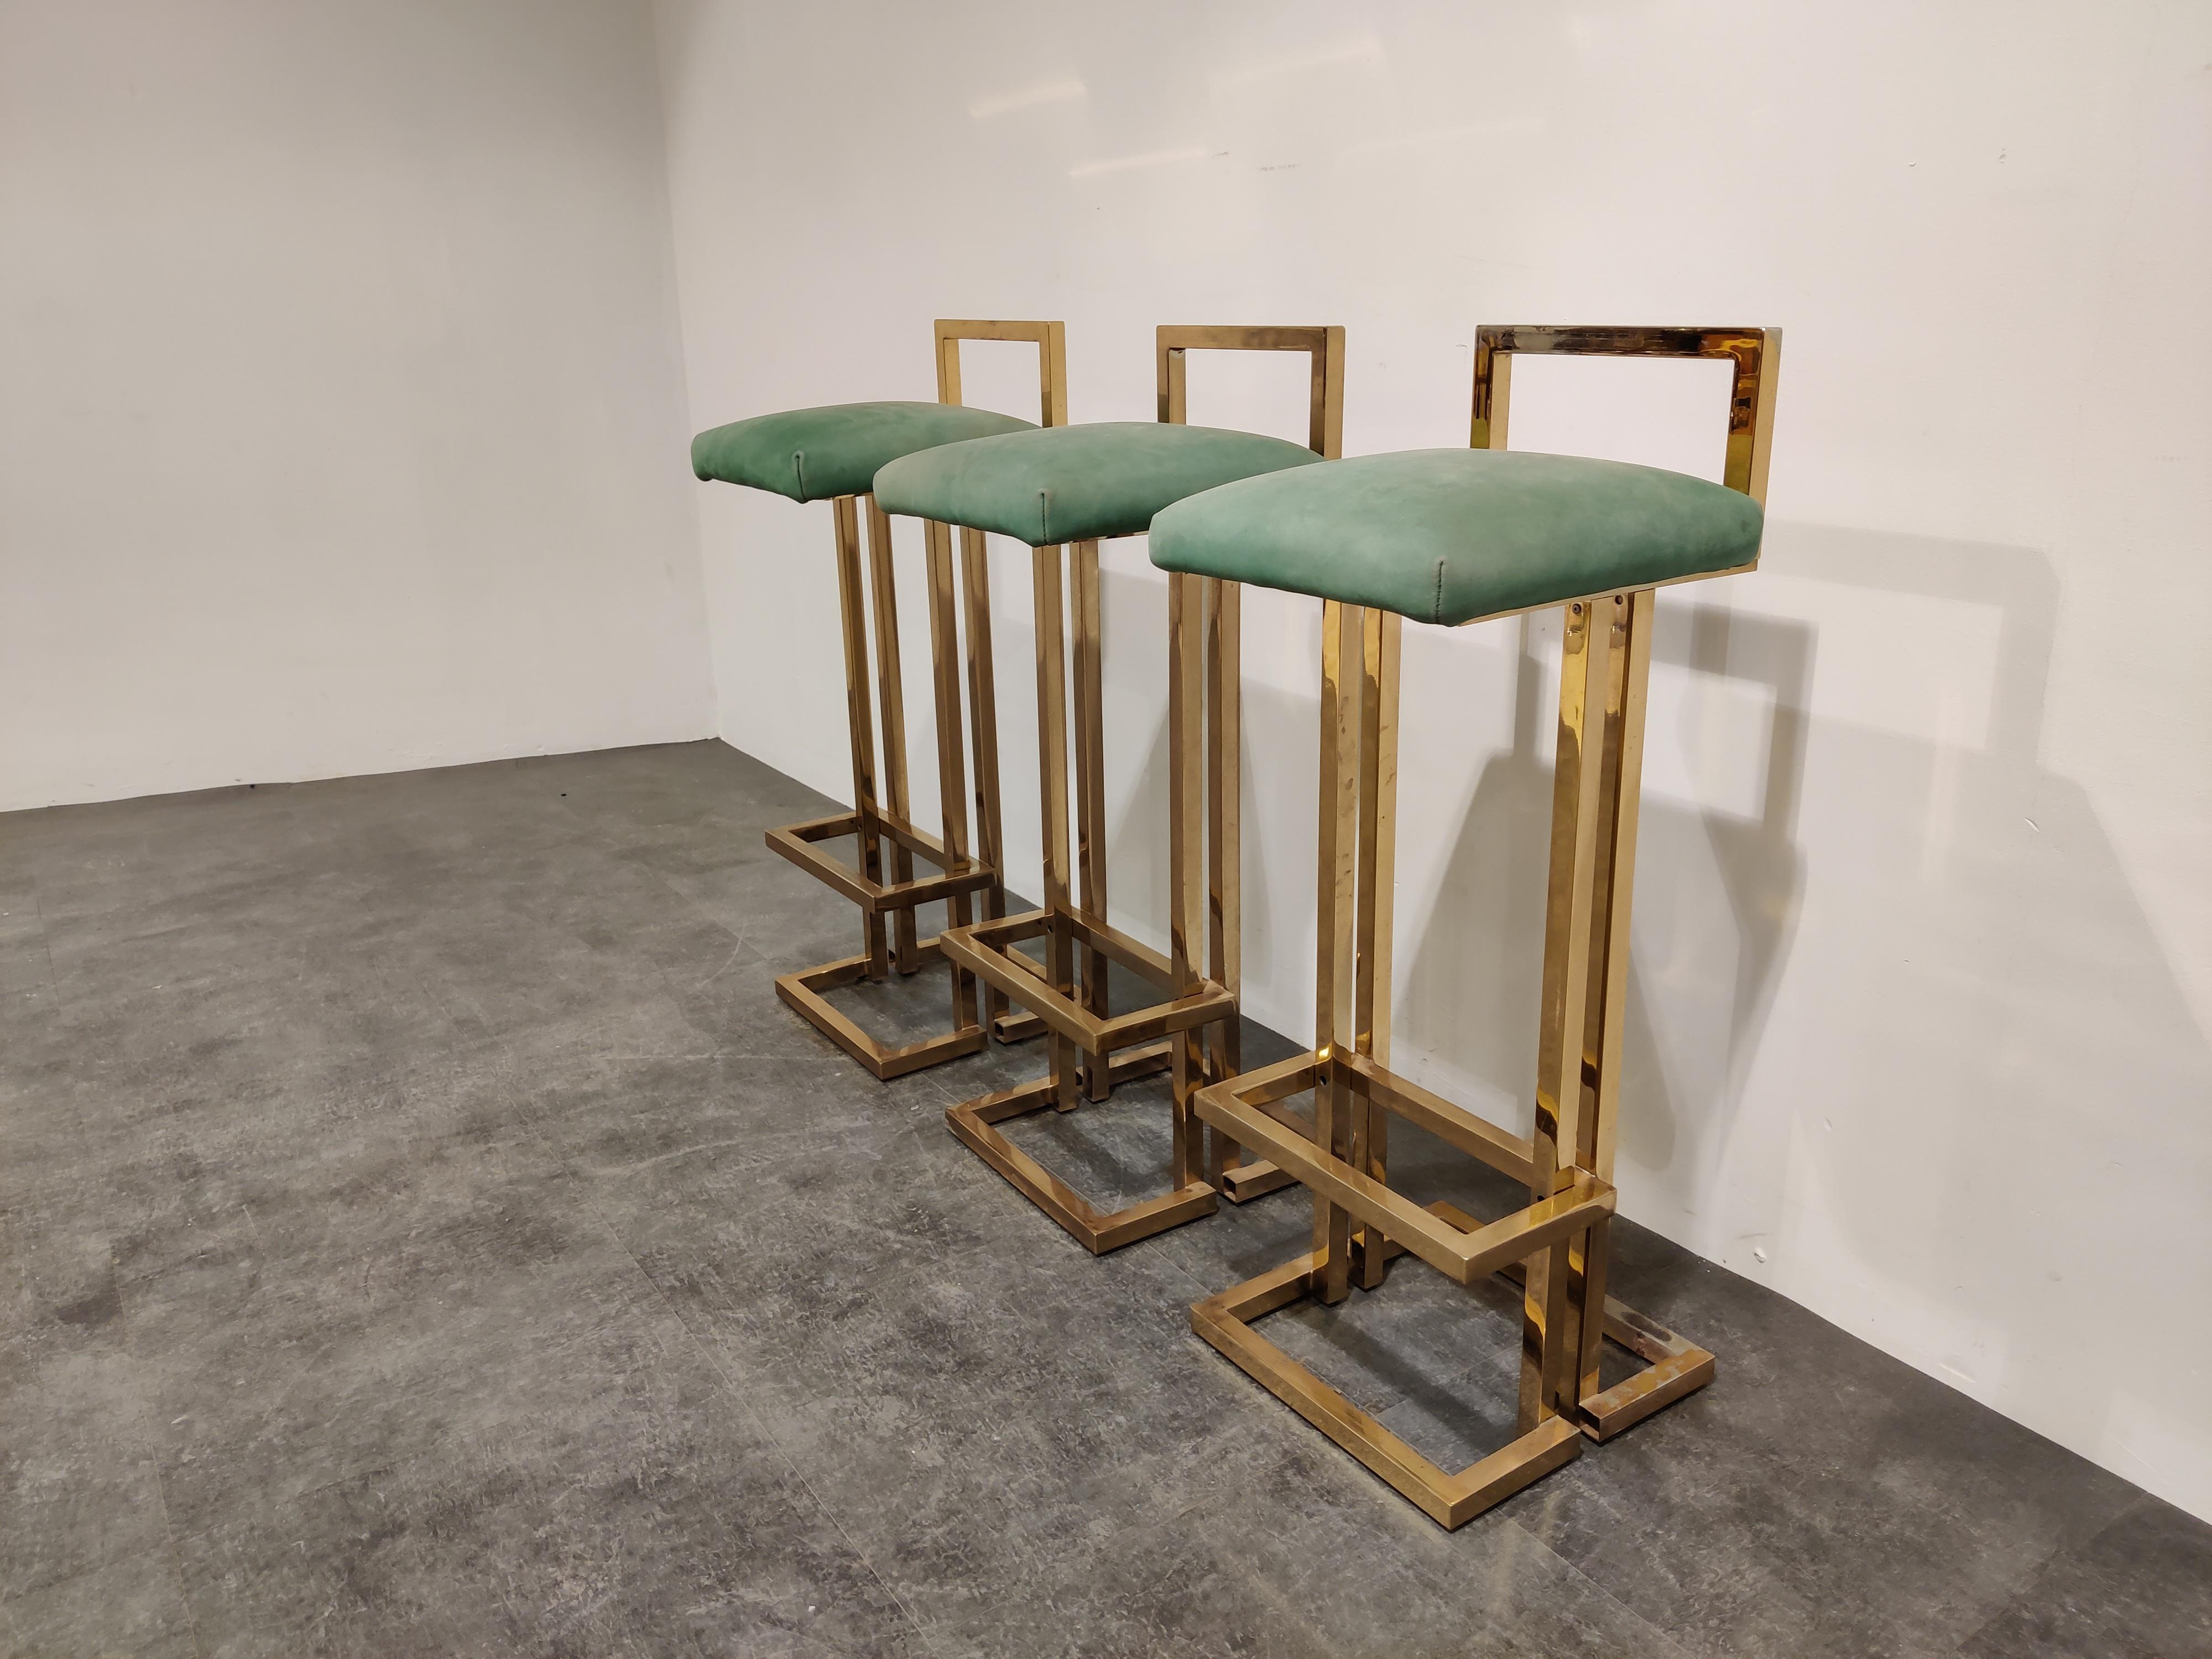 Beautiful brass bar stools by Belgochrom.

Beautiful timeless design with a luxury appeal.

They have their original green Alcan Tara upholstery.

Condition: Two stools are in good original condition
- The third stools have faded brass on the